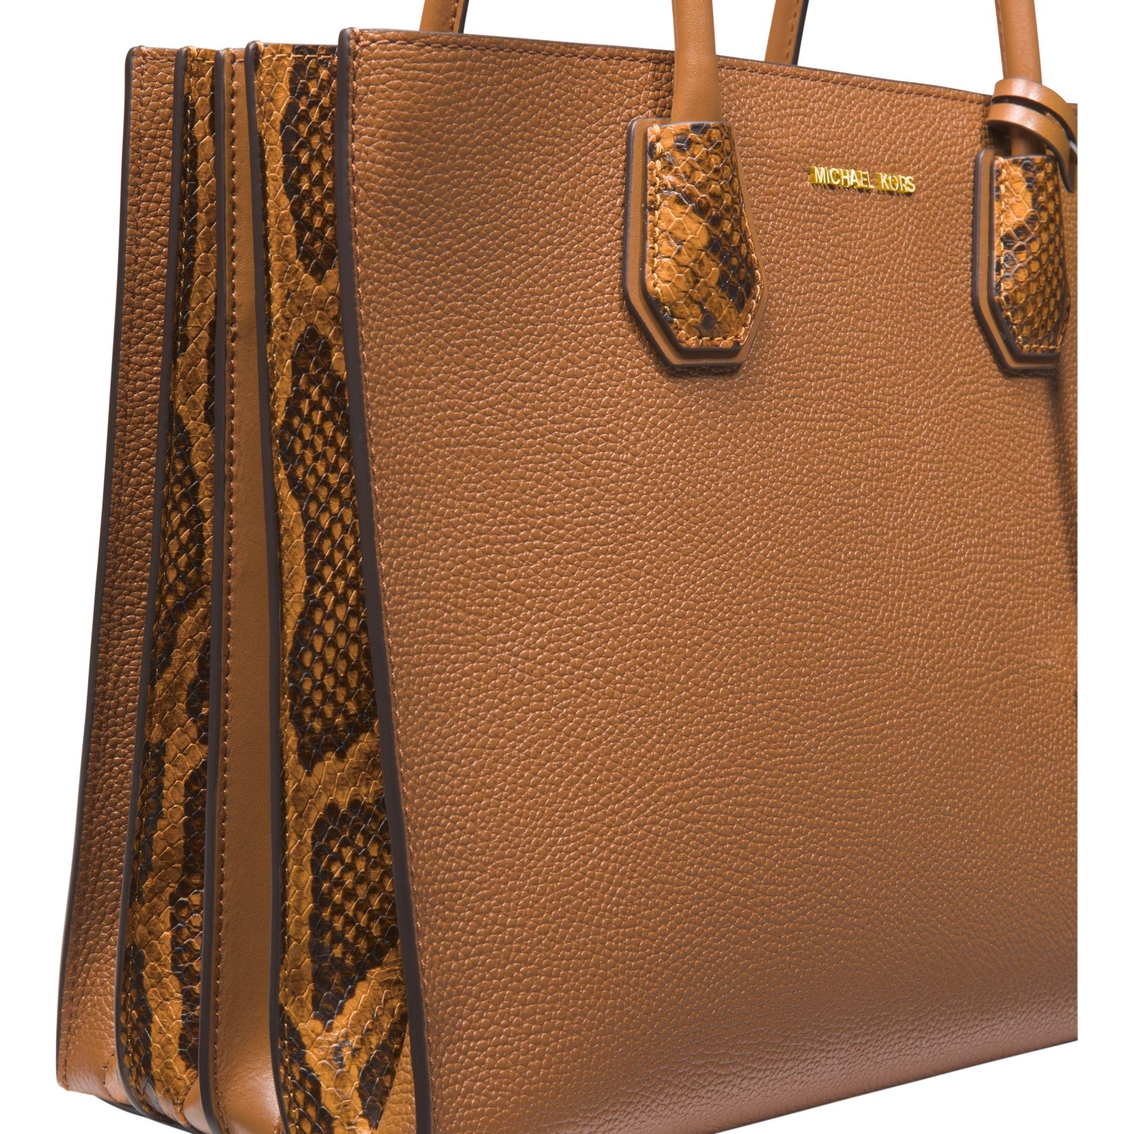 Michael Kors Mercer Large Accordion Convertible Tote, Totes & Shoppers, Clothing & Accessories